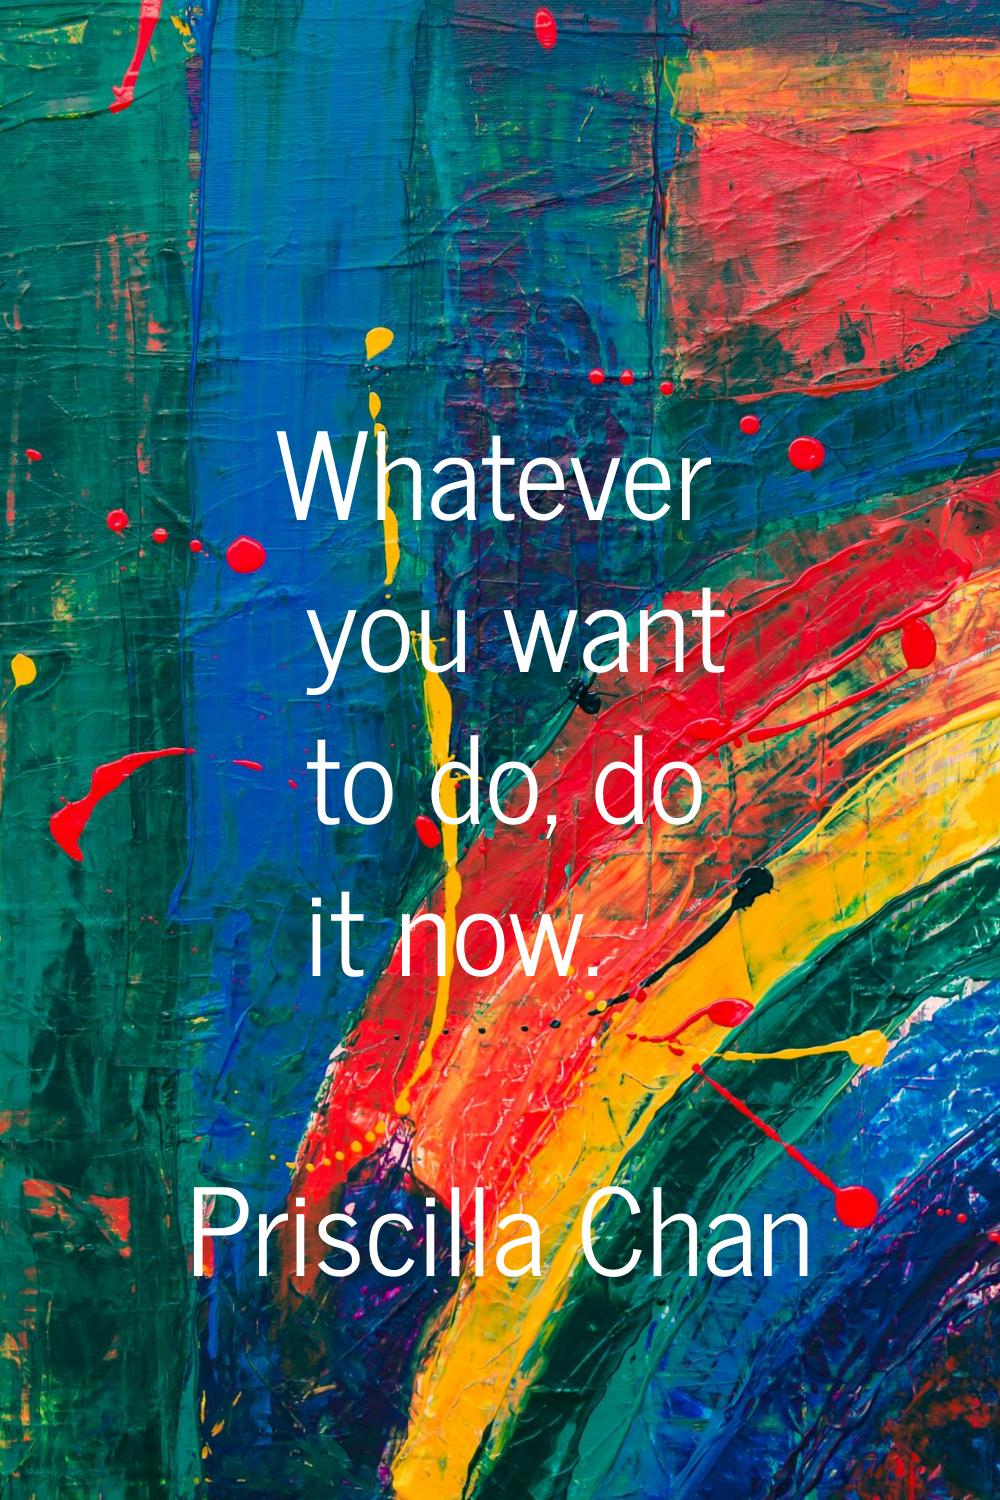 Whatever you want to do, do it now.